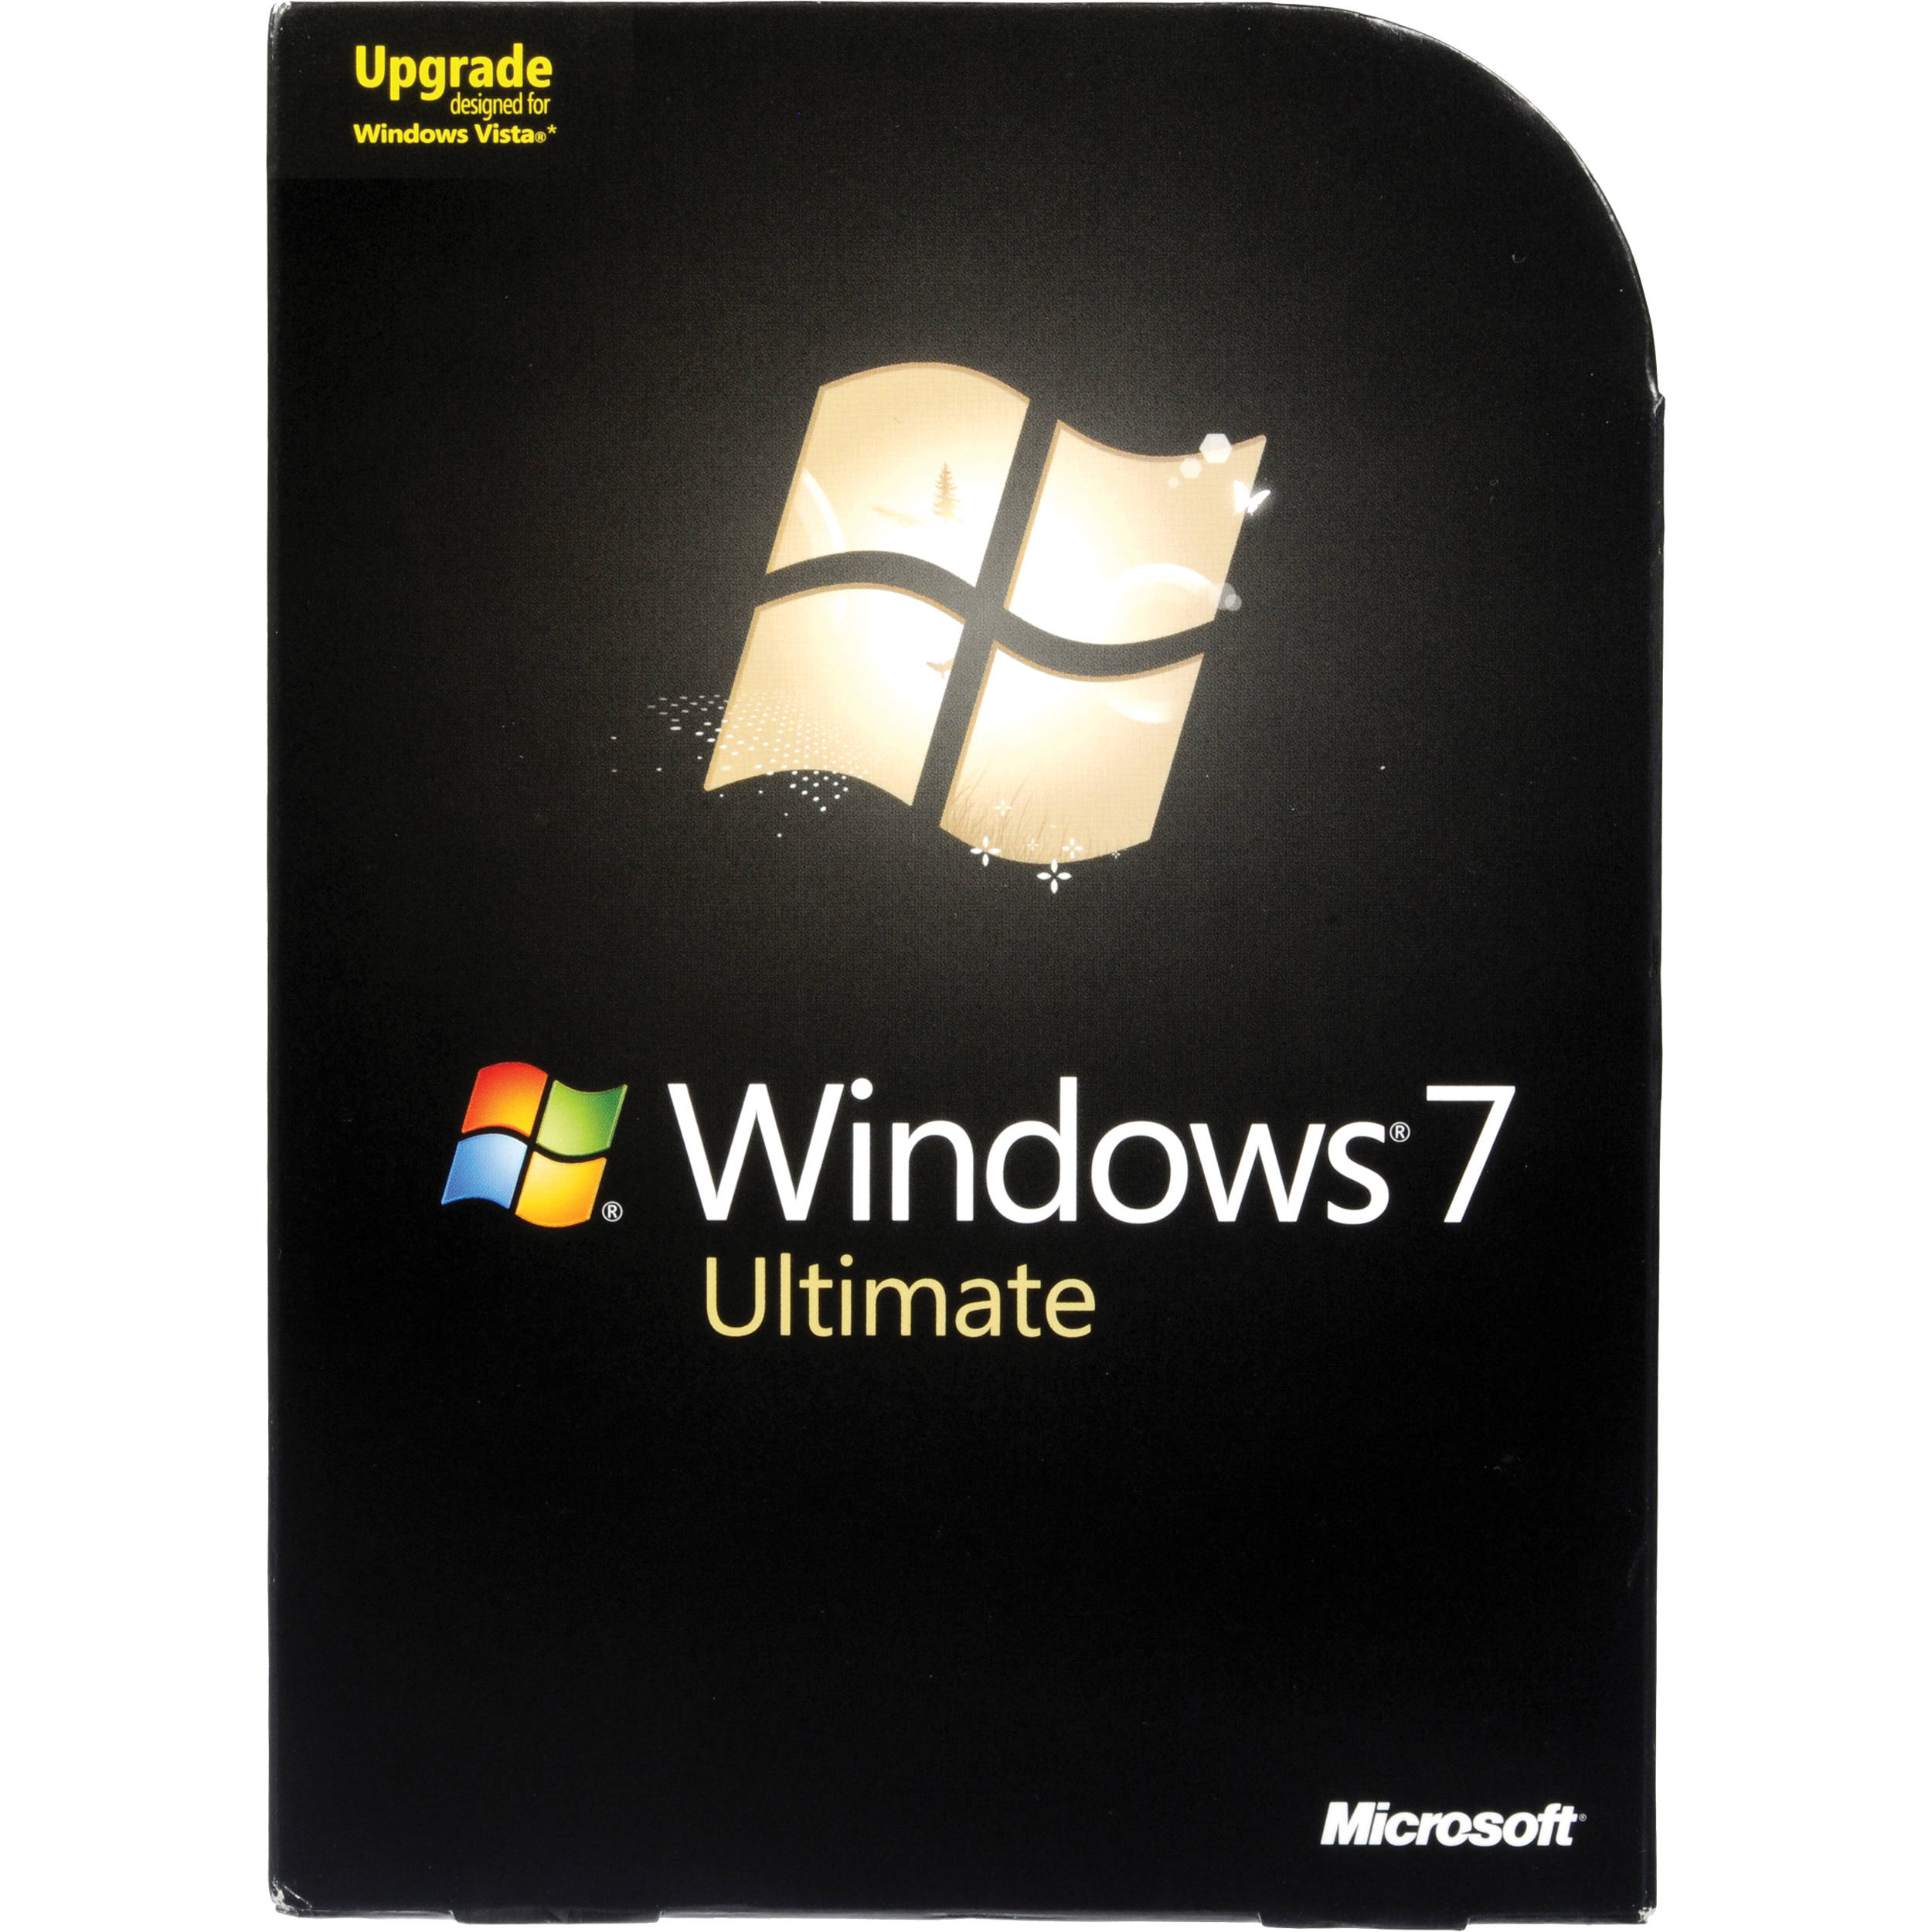 Windows 7 boot iso download